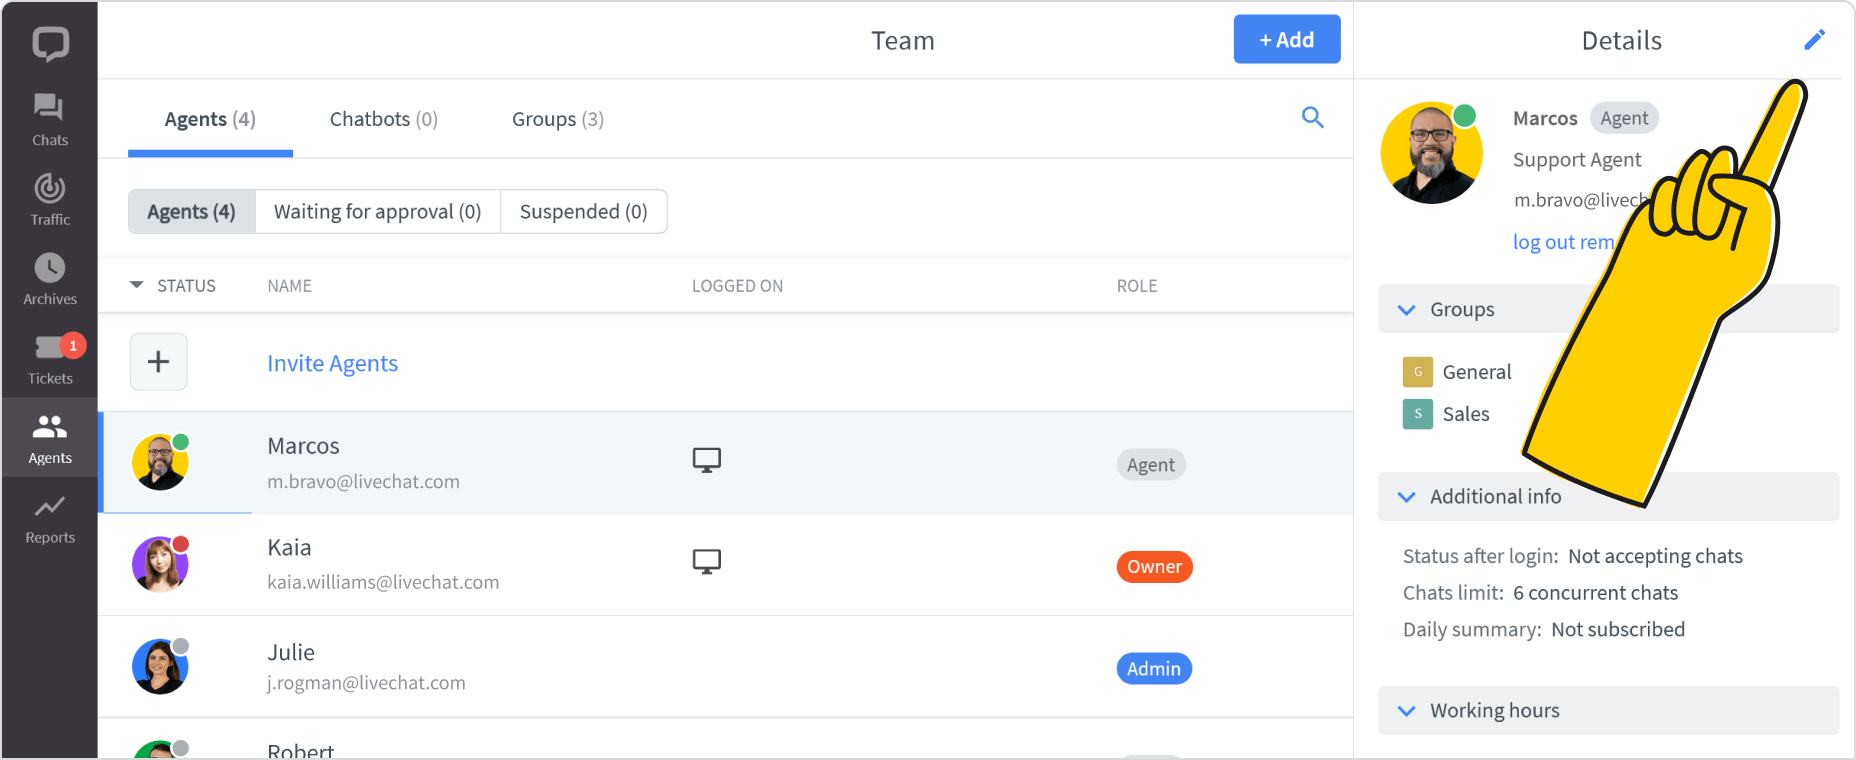 Agent profile in LiveChat app